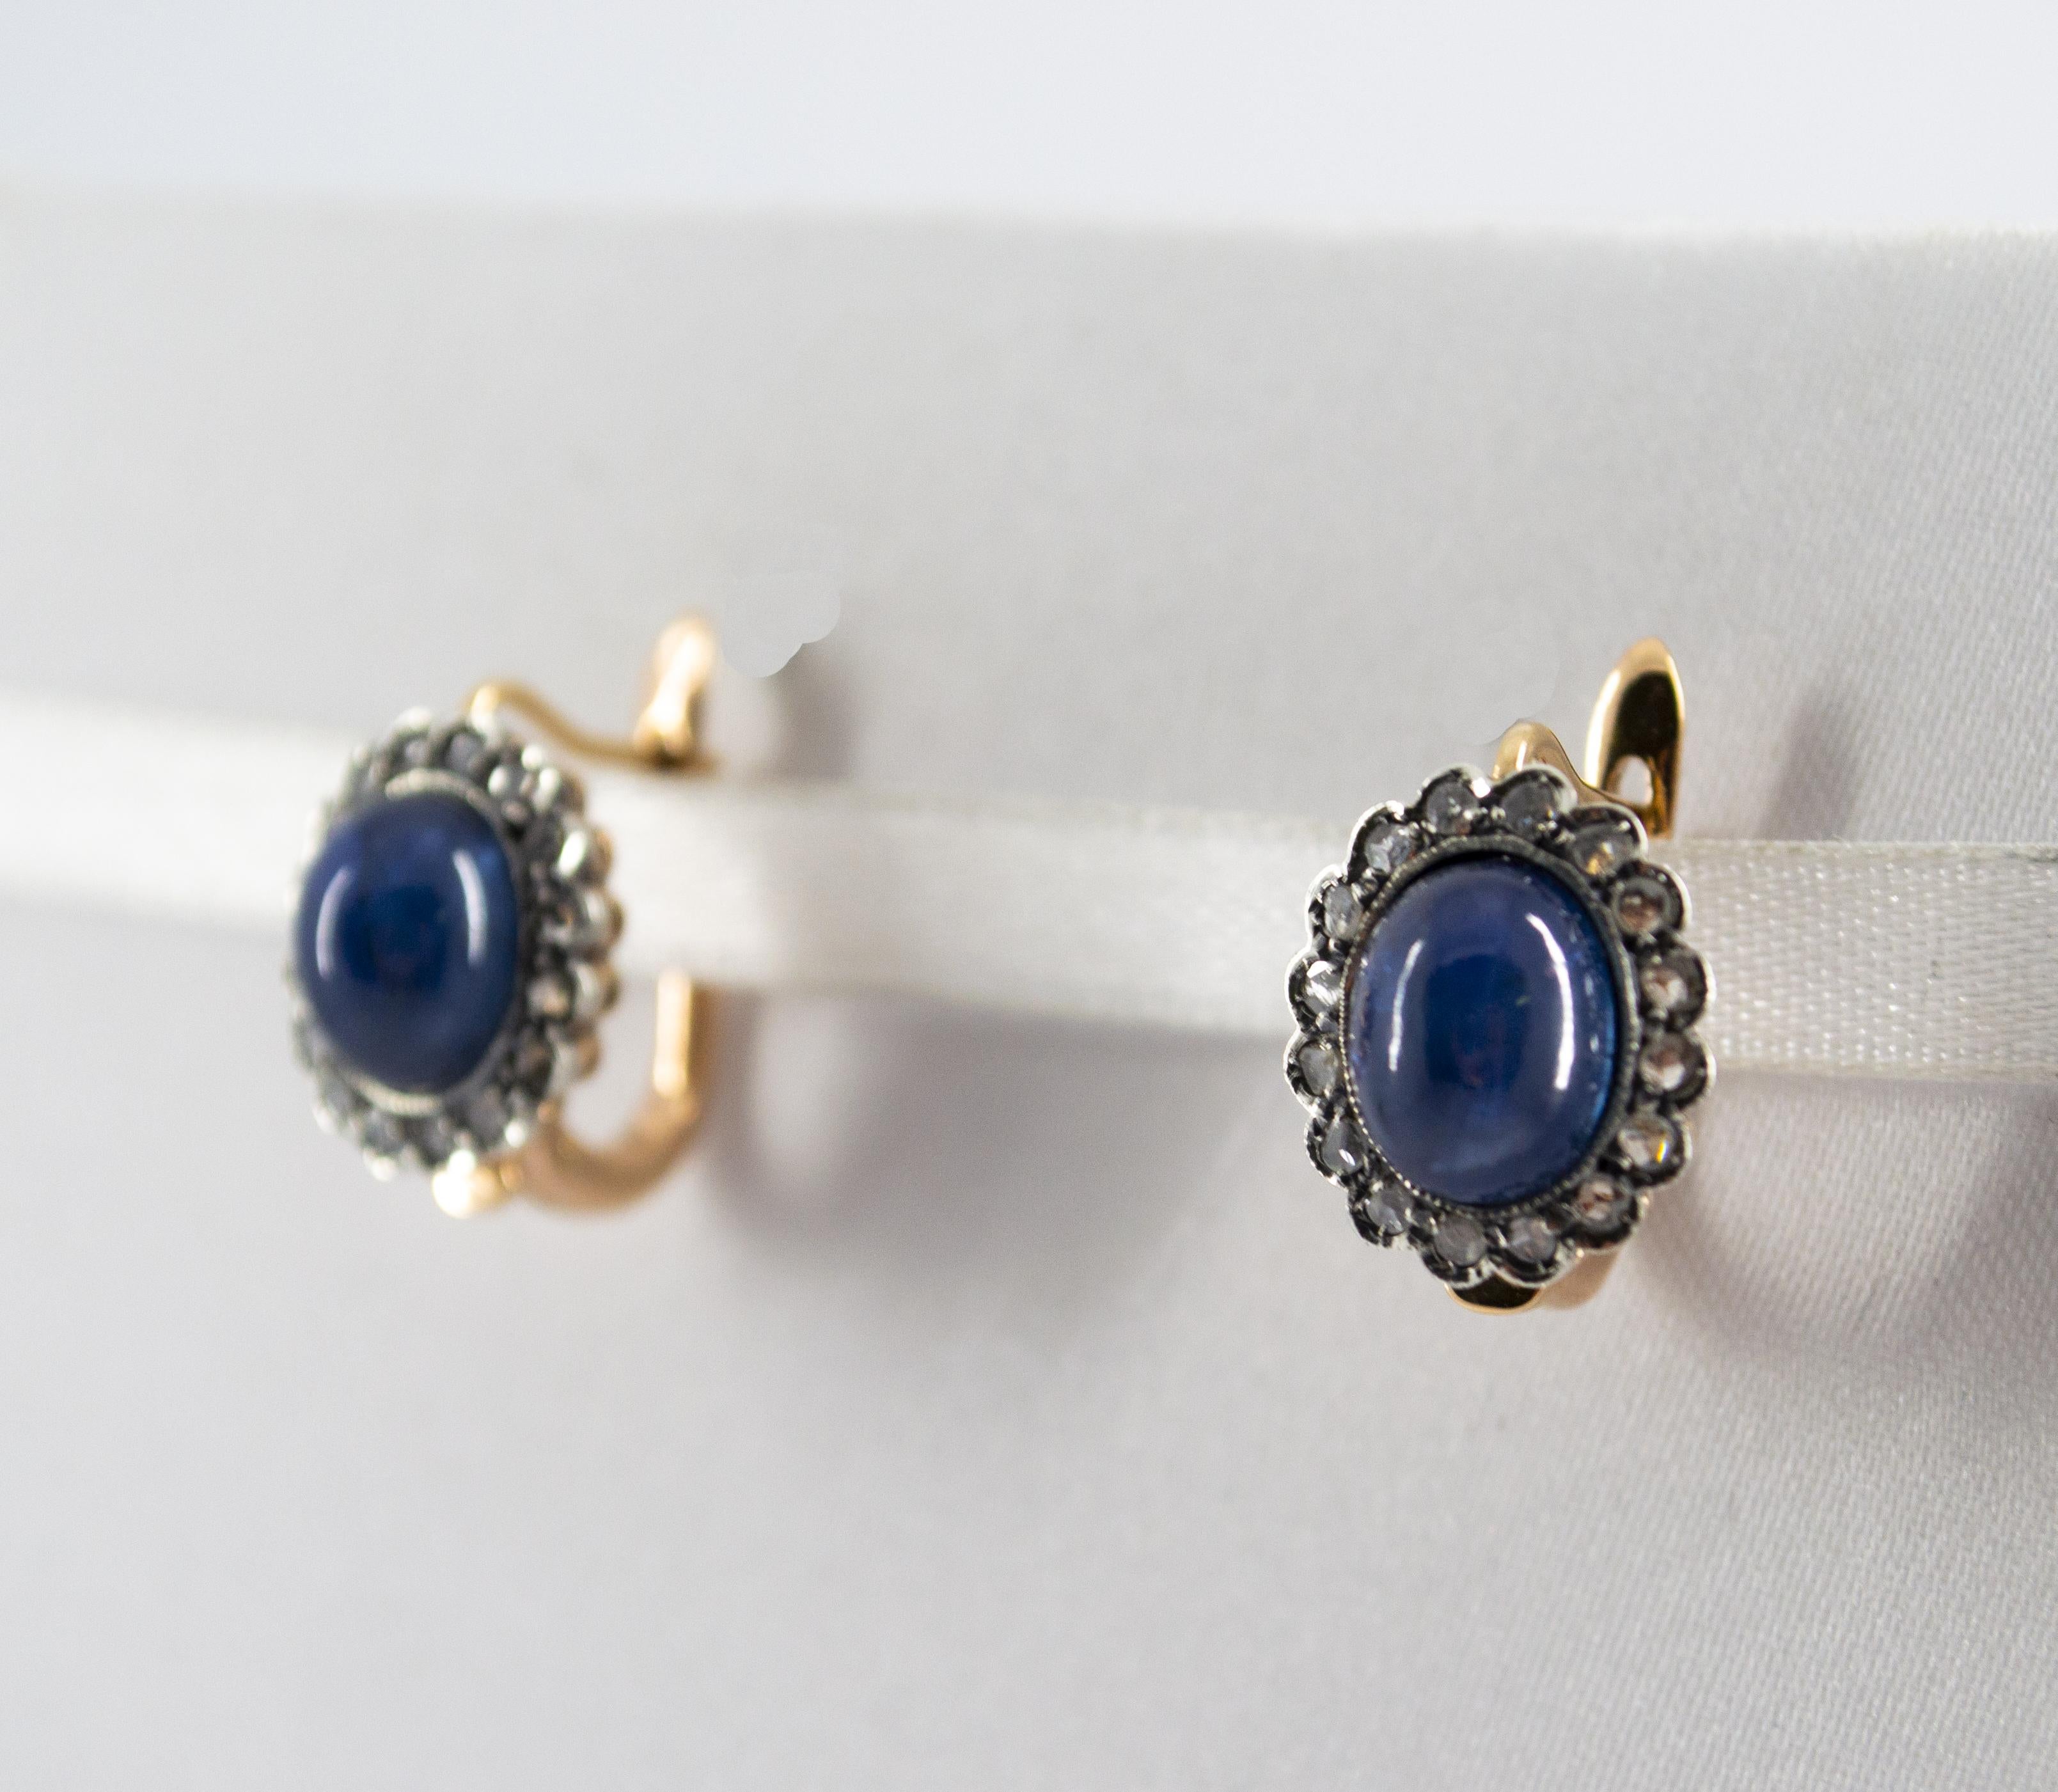 These Earrings are made of 9K Yellow Gold and Sterling Silver.
These Earrings have 0.30 Carats of White Diamonds.
These Earrings have 7.10 Carats of Blue Sapphires.
All our Earrings have pins for pierced ears but we can change the closure and make